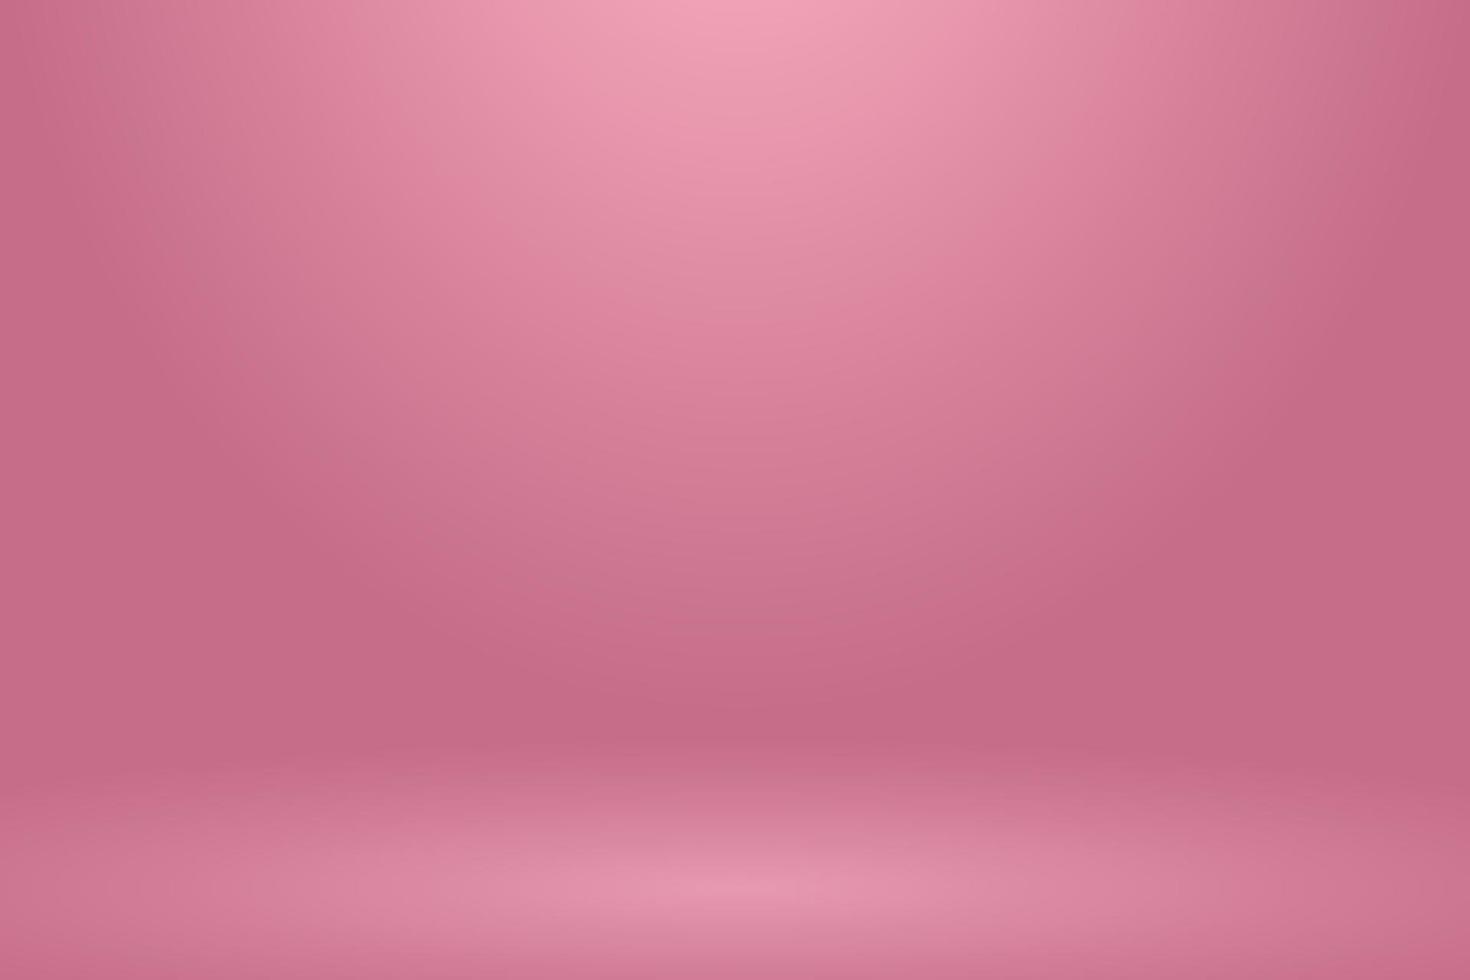 Abstract background. The studio space is empty. With a smooth and soft pink color vector